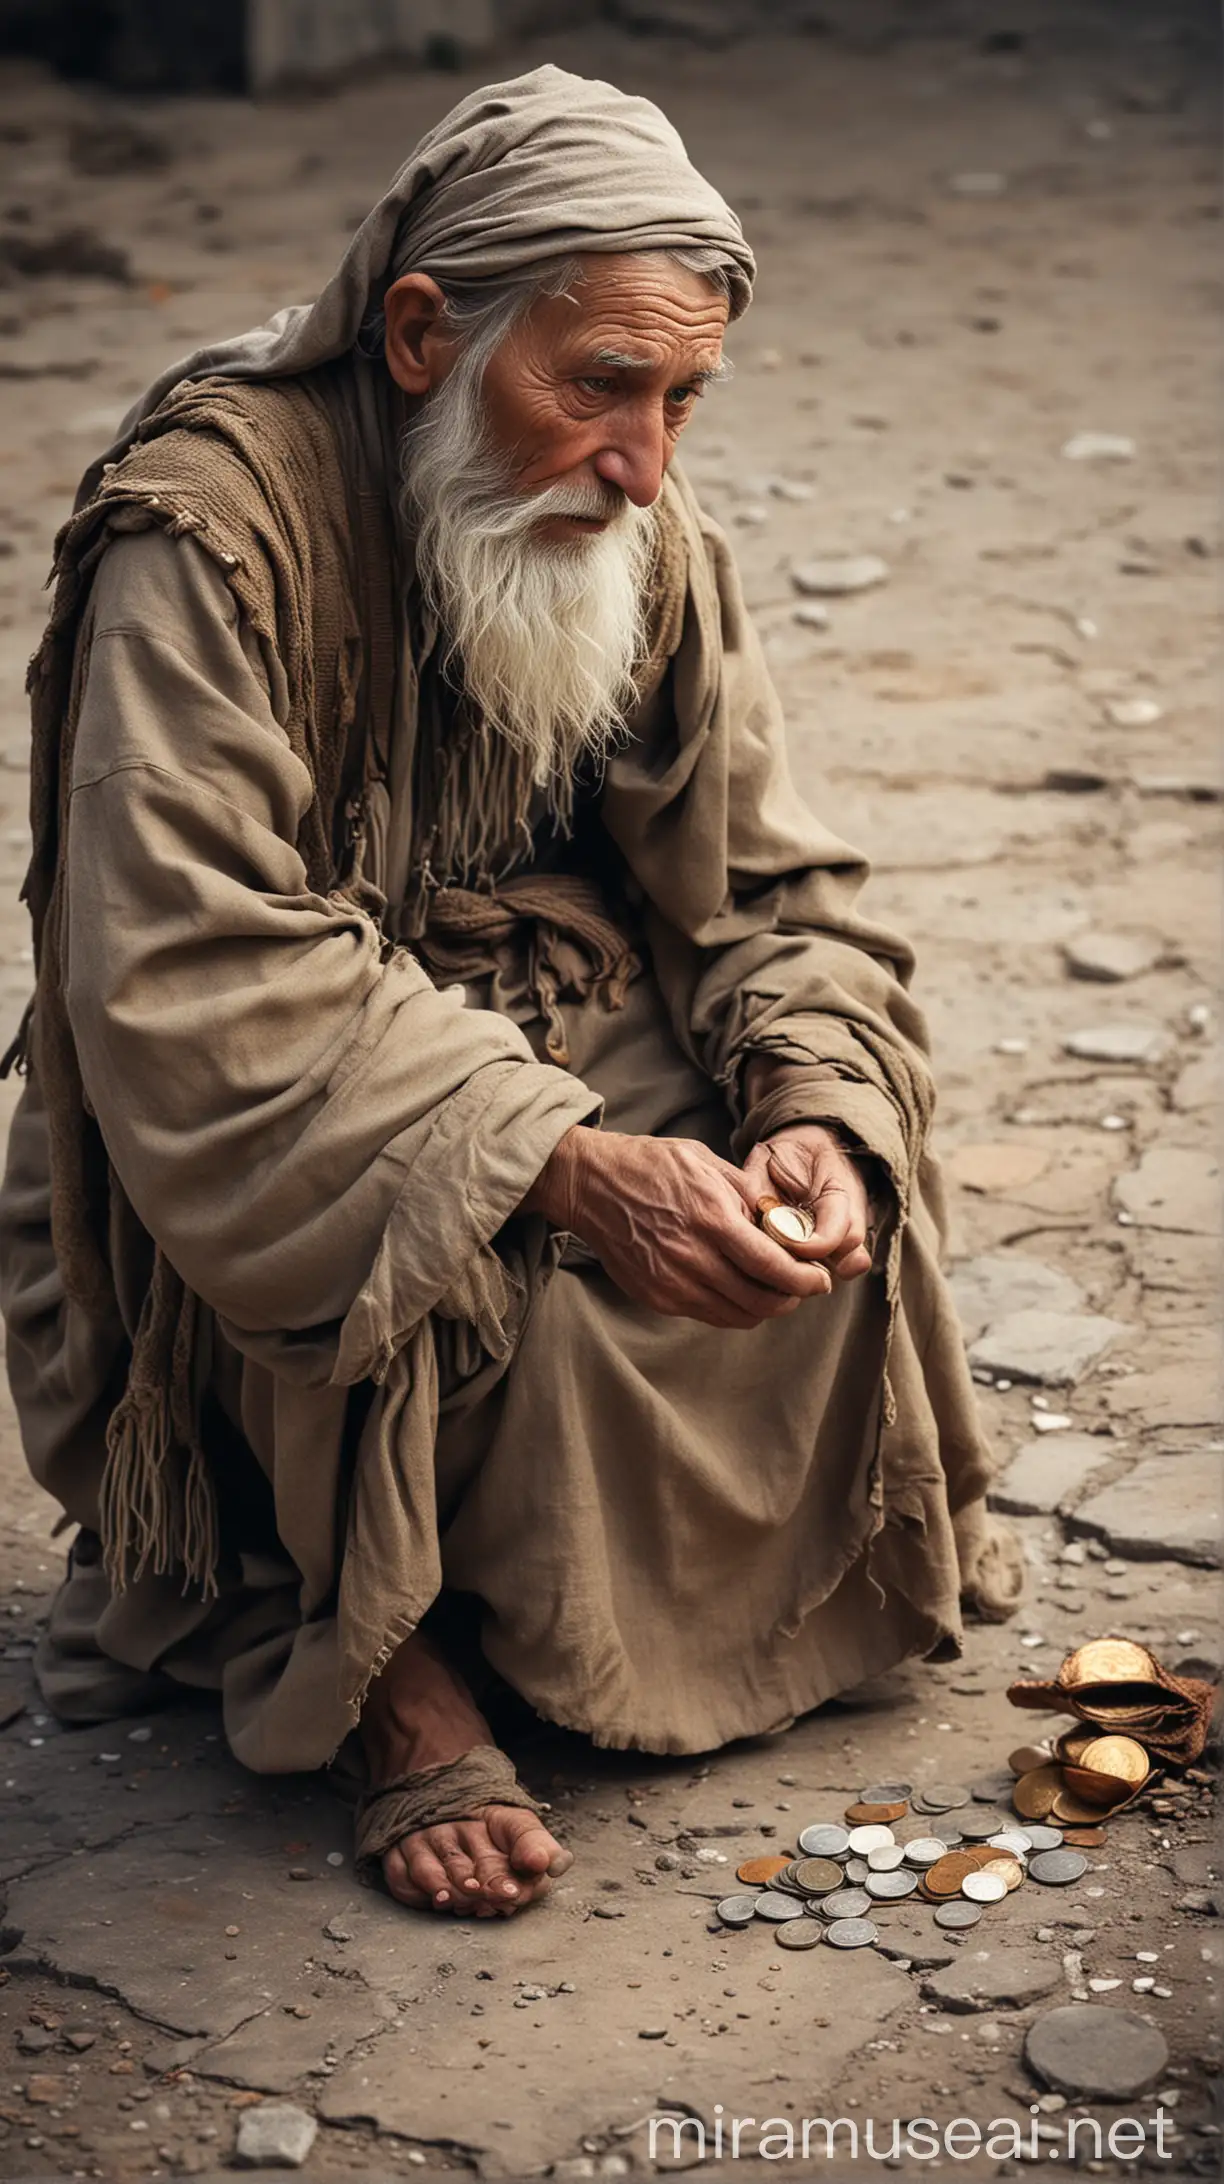 A poor beggar asked the wise man for a coin, and he willingly gave it